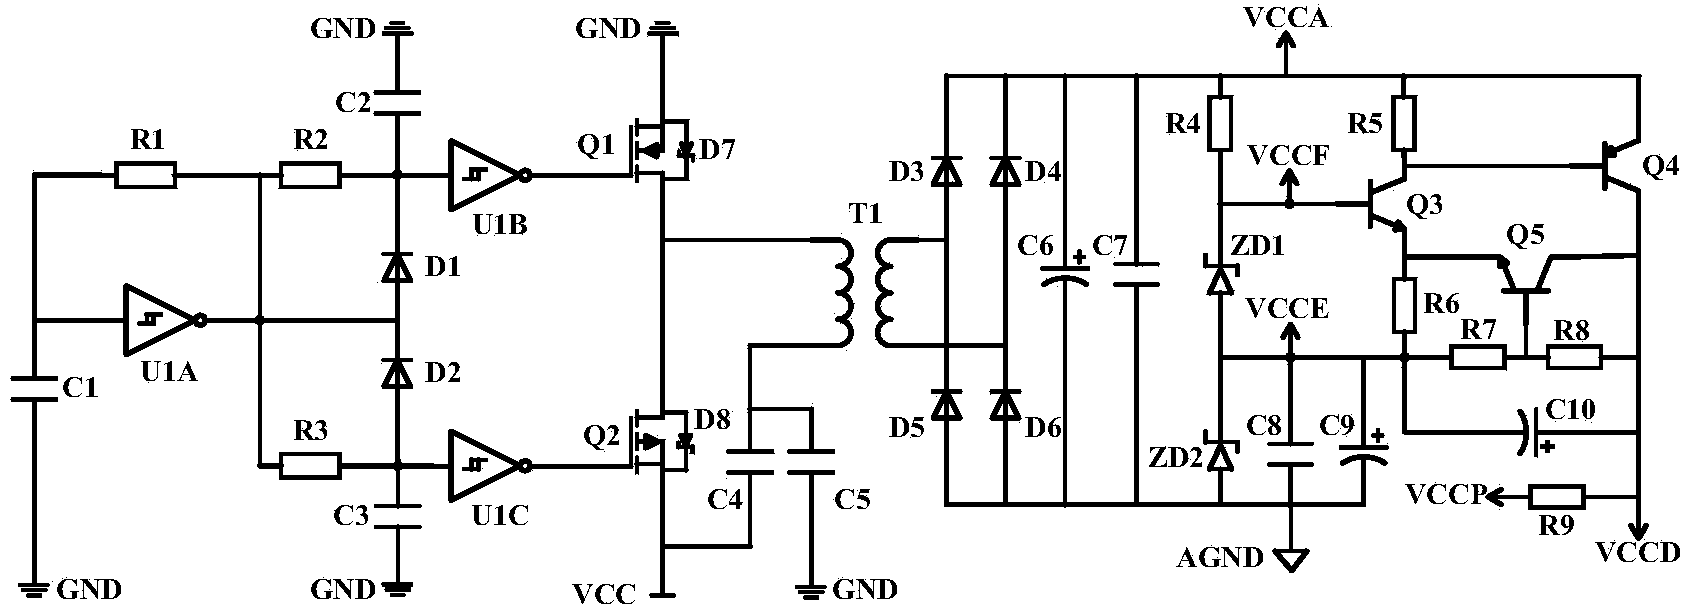 DC-DC conversion circuit suitable for power supply on high-voltage side of IGBT drive module